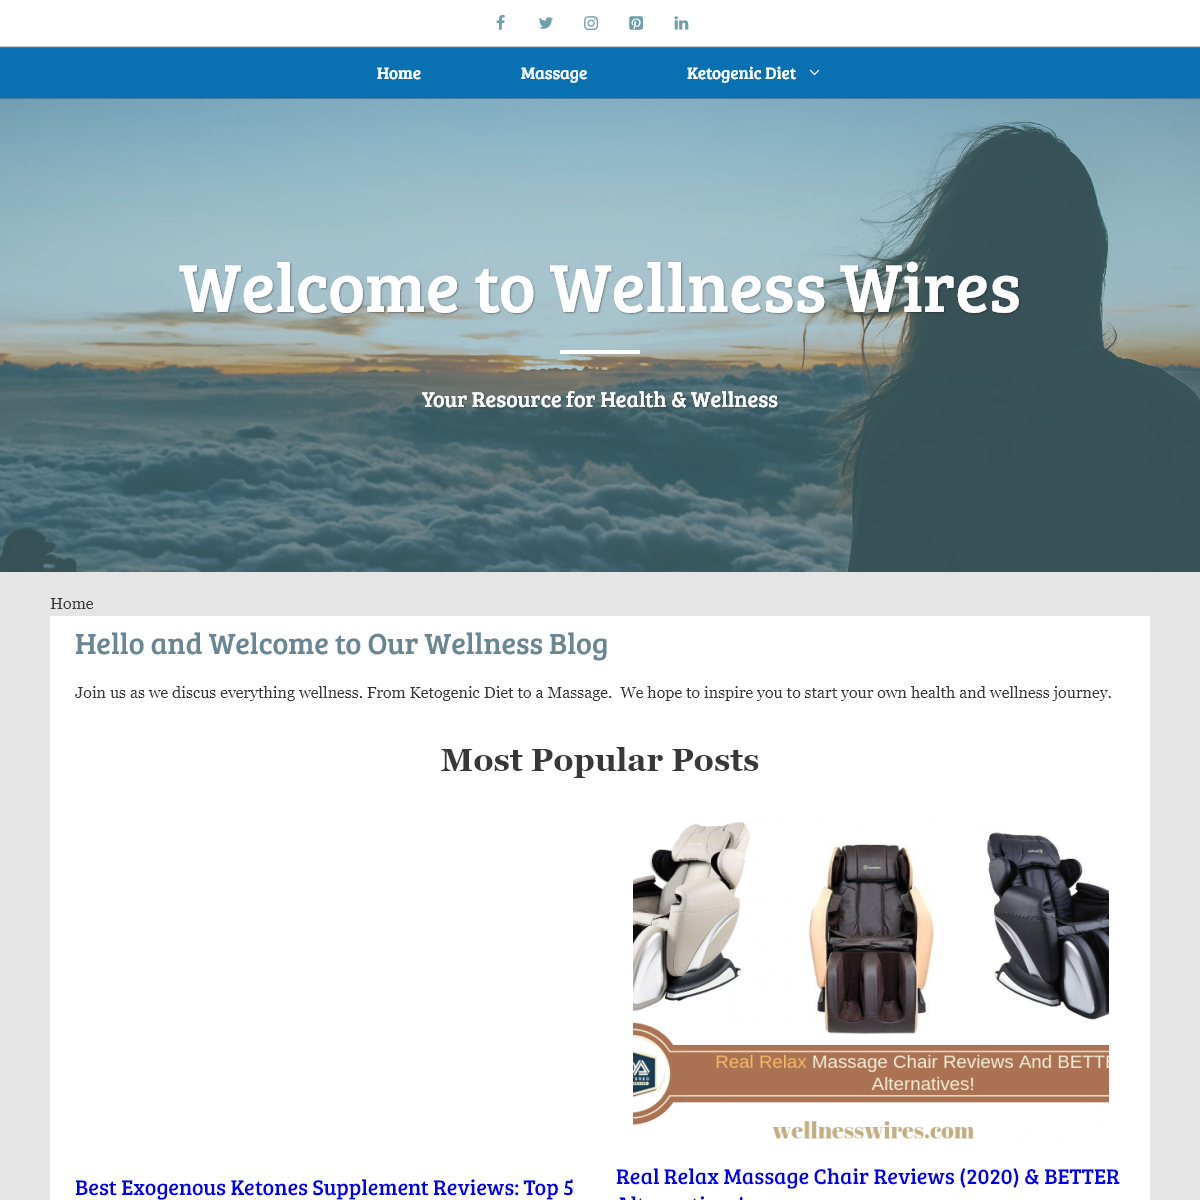 A complete backup of wellnesswires.com